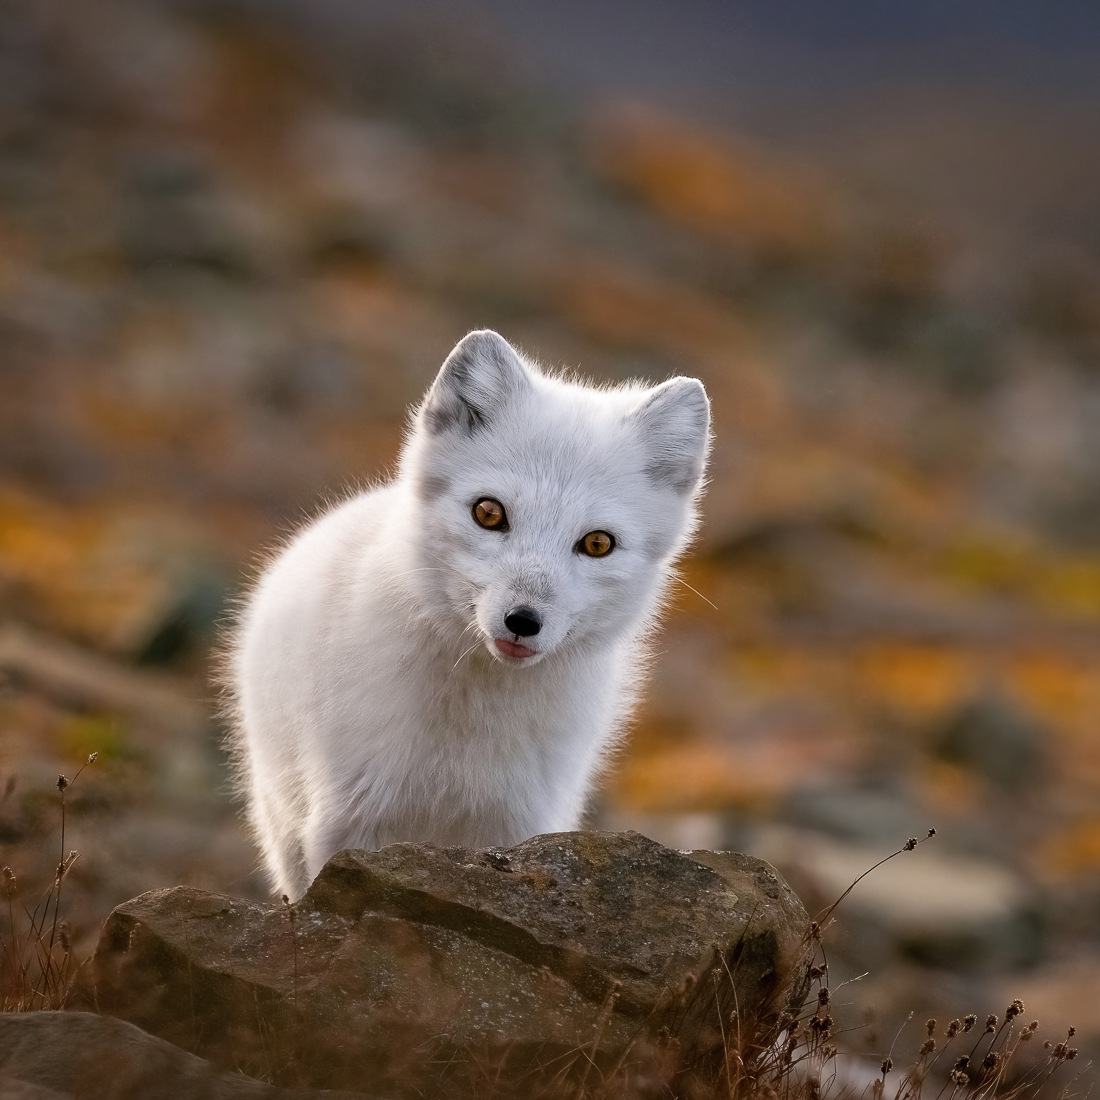 Eye to eye with arctic foxes